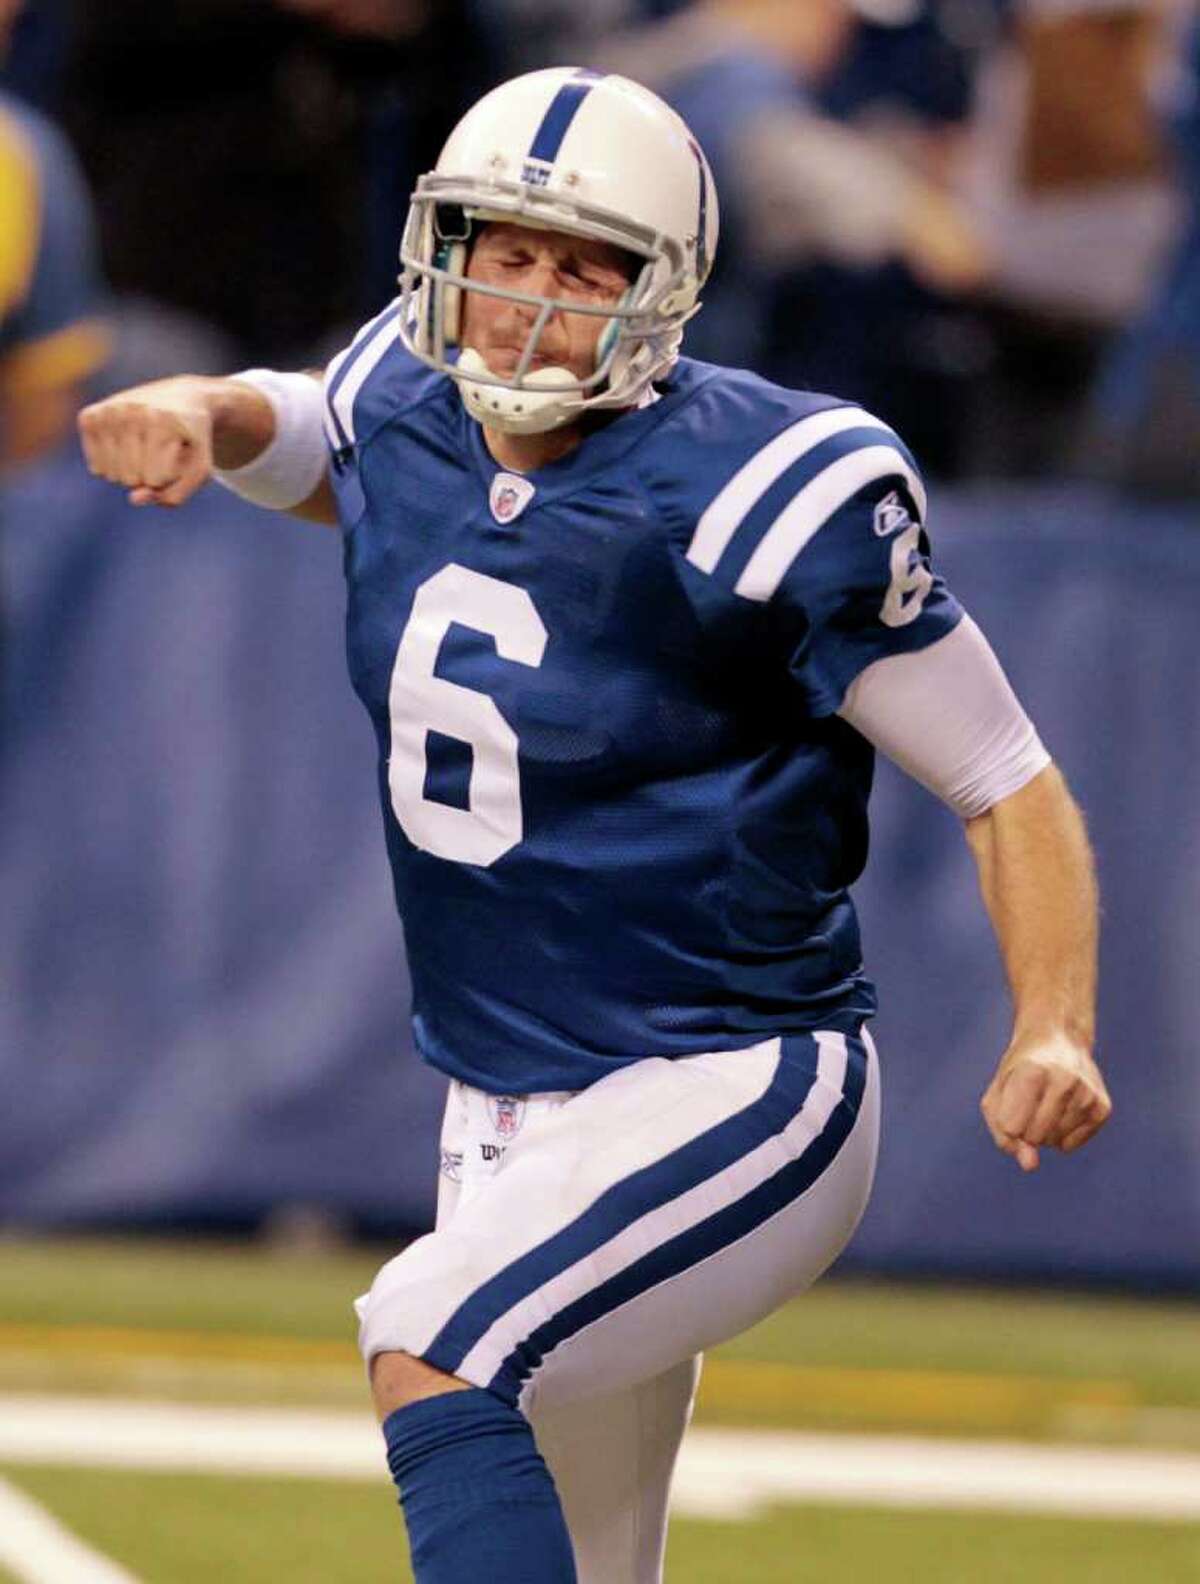 Indianapolis Colts quarterback Dan Orlovsky reacts after throwing the game-winning touchdown during the fourth quarter of an NFL football game against the Houston Texans on Thursday, Dec. 22, 2011, in Indianapolis. Indianapolis won 19-16.